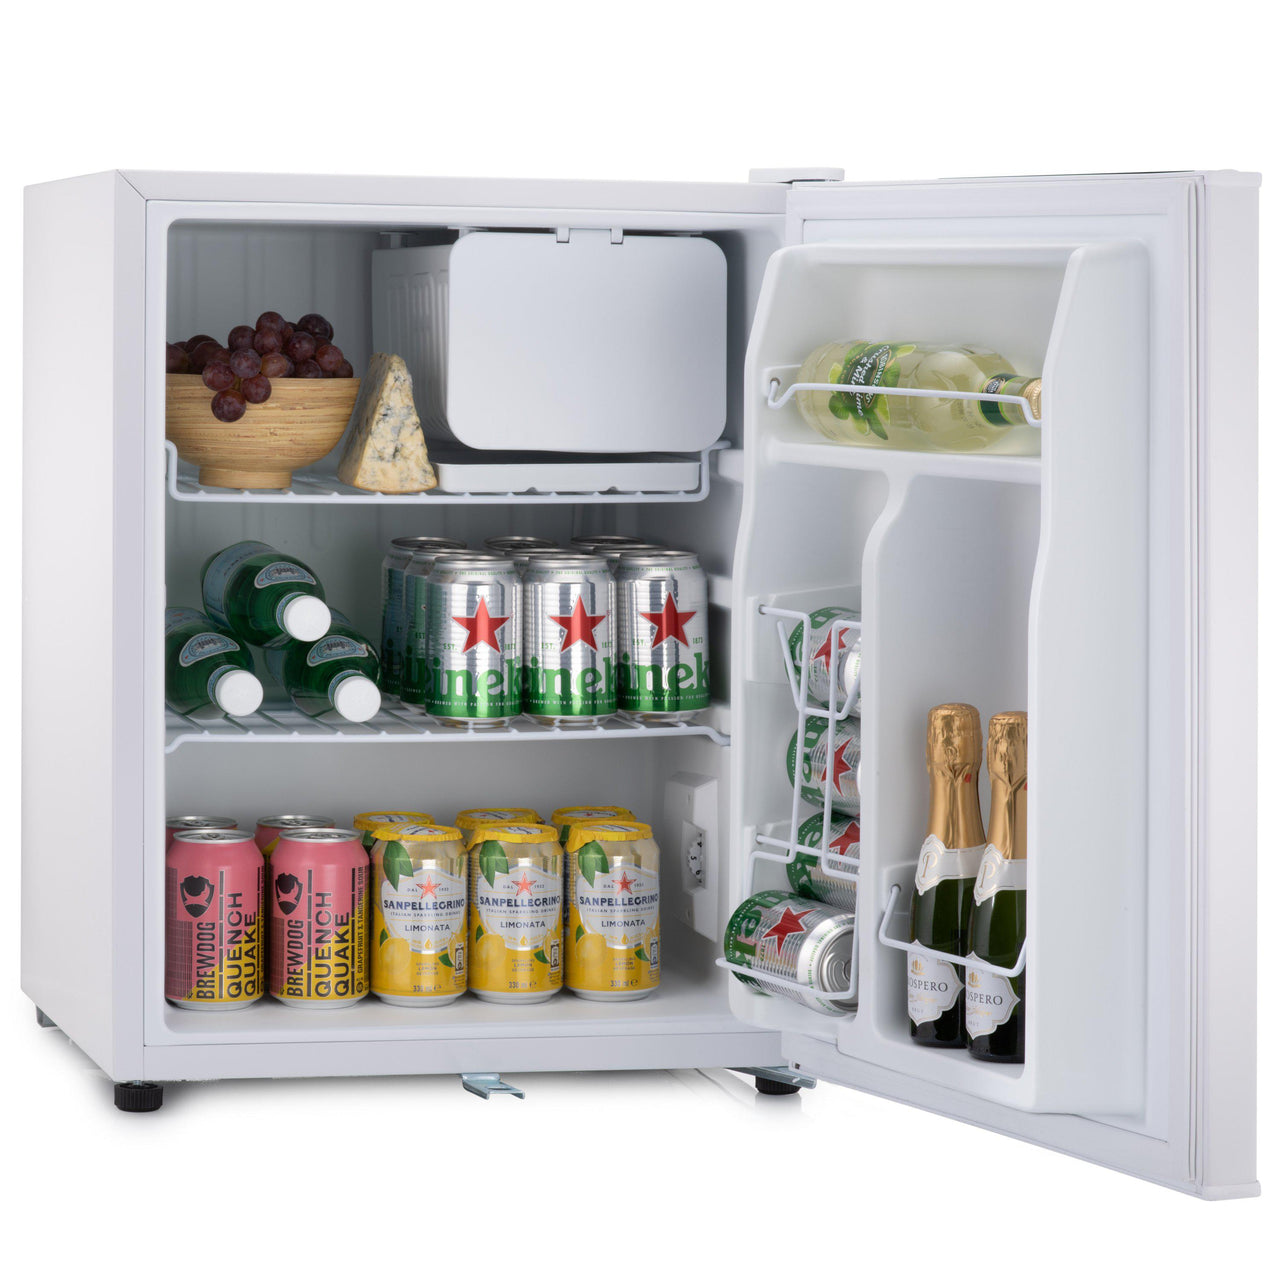 Subcold Eco 75 litre table top fridge white with snacks and drinks inside